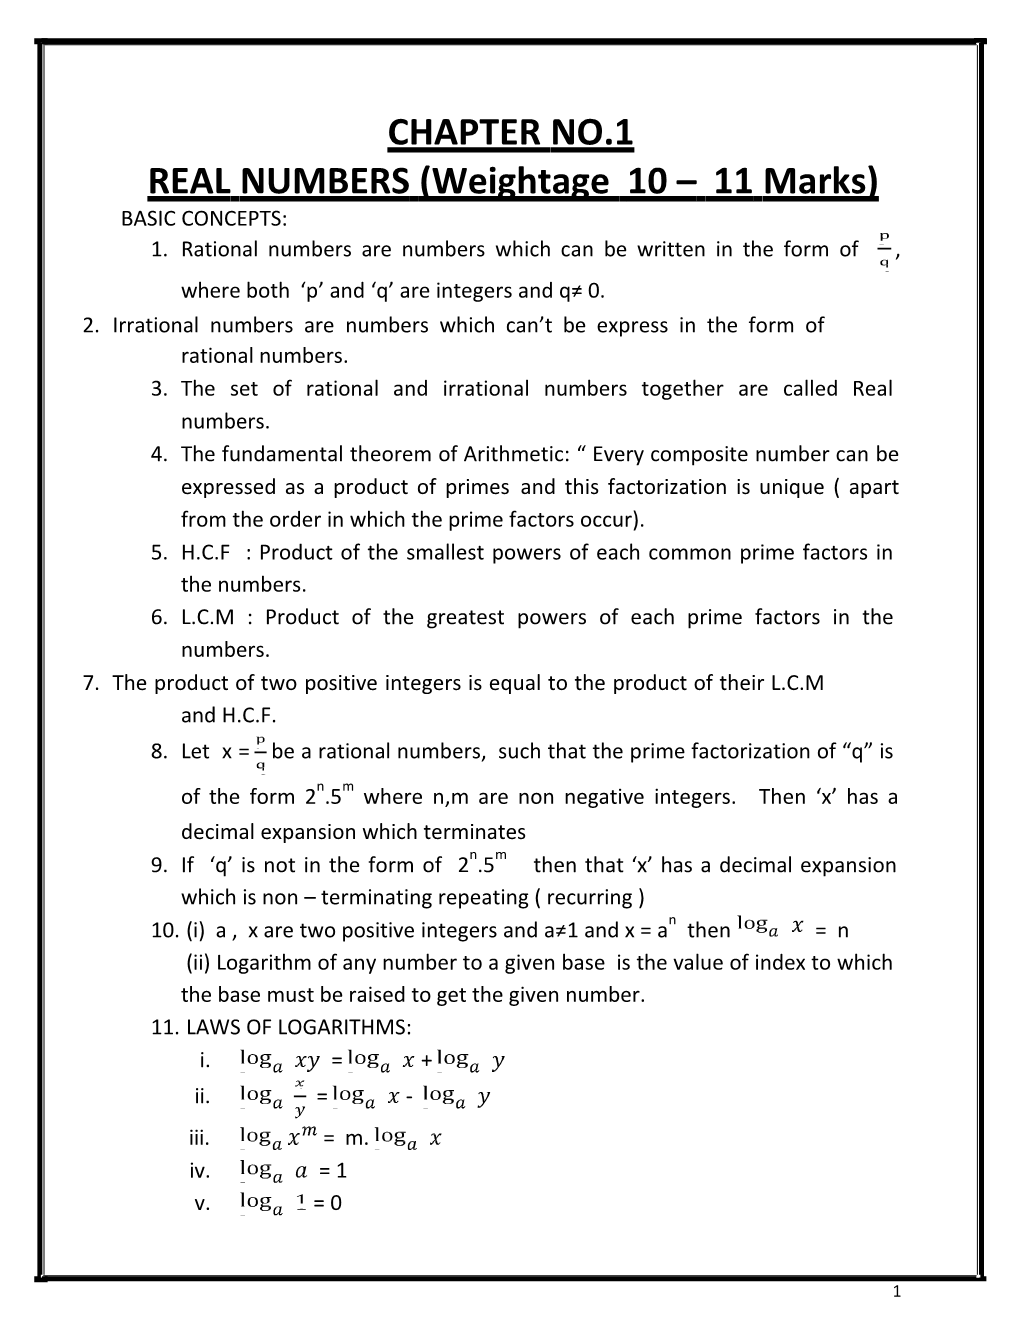 3.The Set of Rational and Irrational Numbers Together Are Called Realnumbers